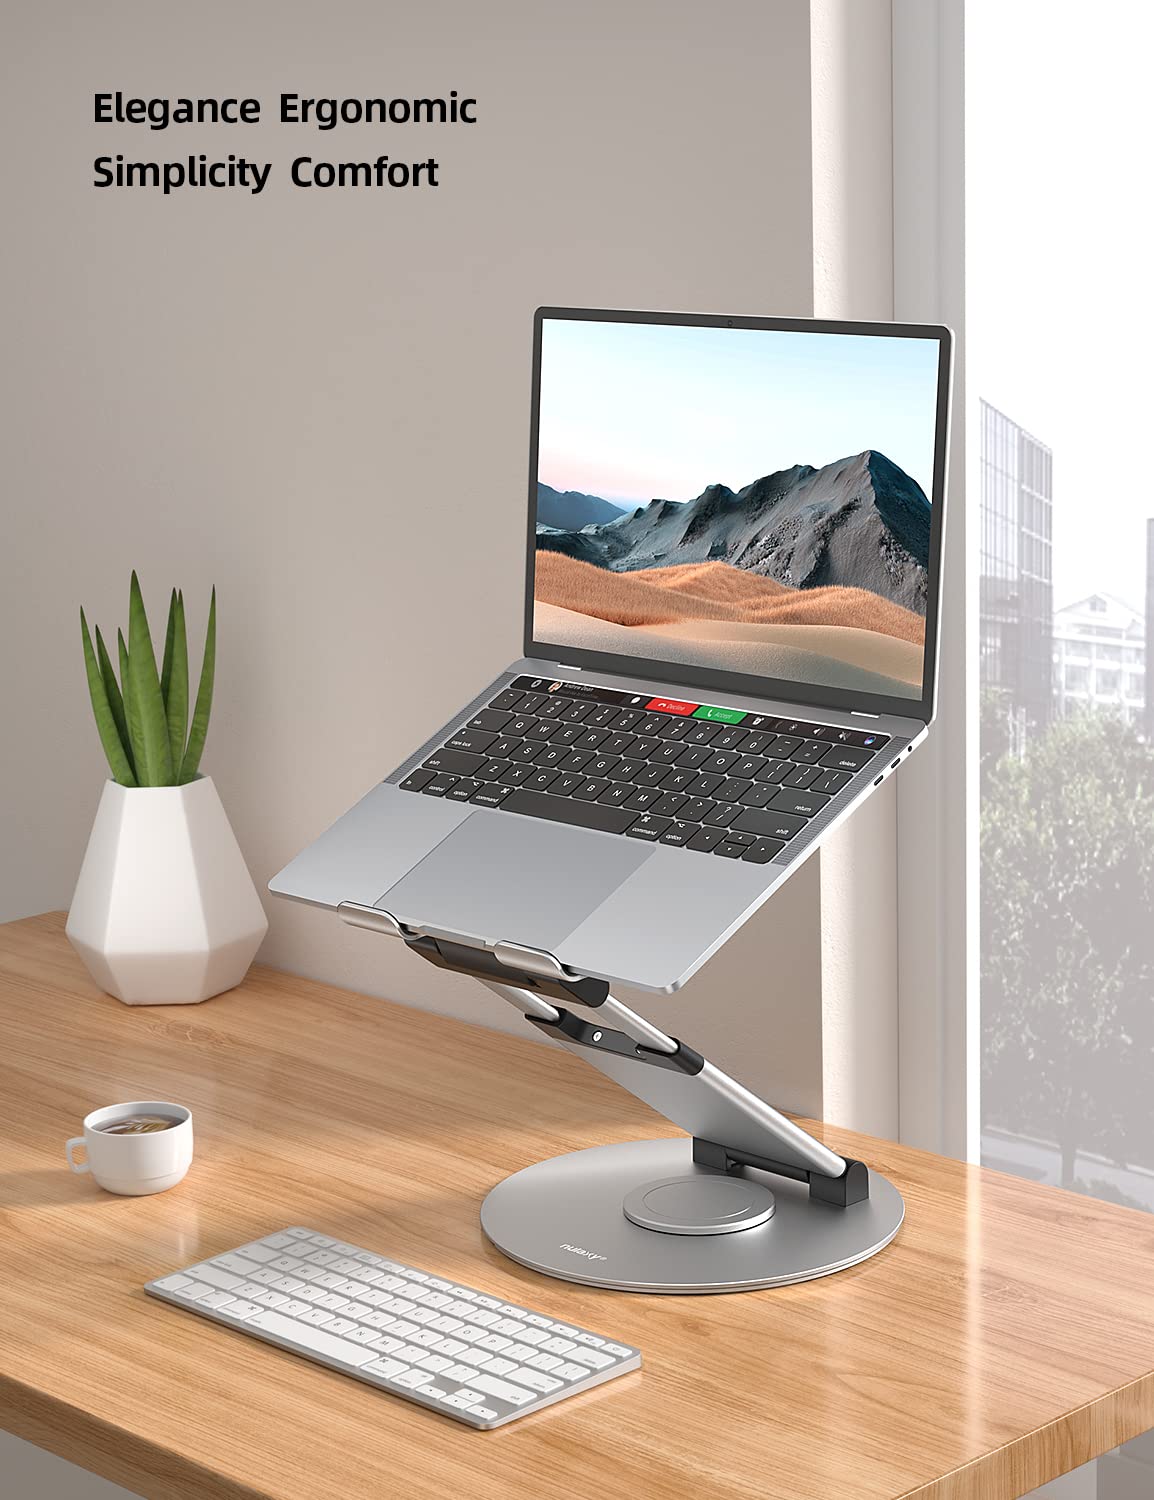 Nulaxy Telescopic 360 Rotating Laptop Stand for Desk Adjustable Height Swivel Pull Out Design Ergonomic Laptop Riser Fits All MacBook, Laptops - LS18